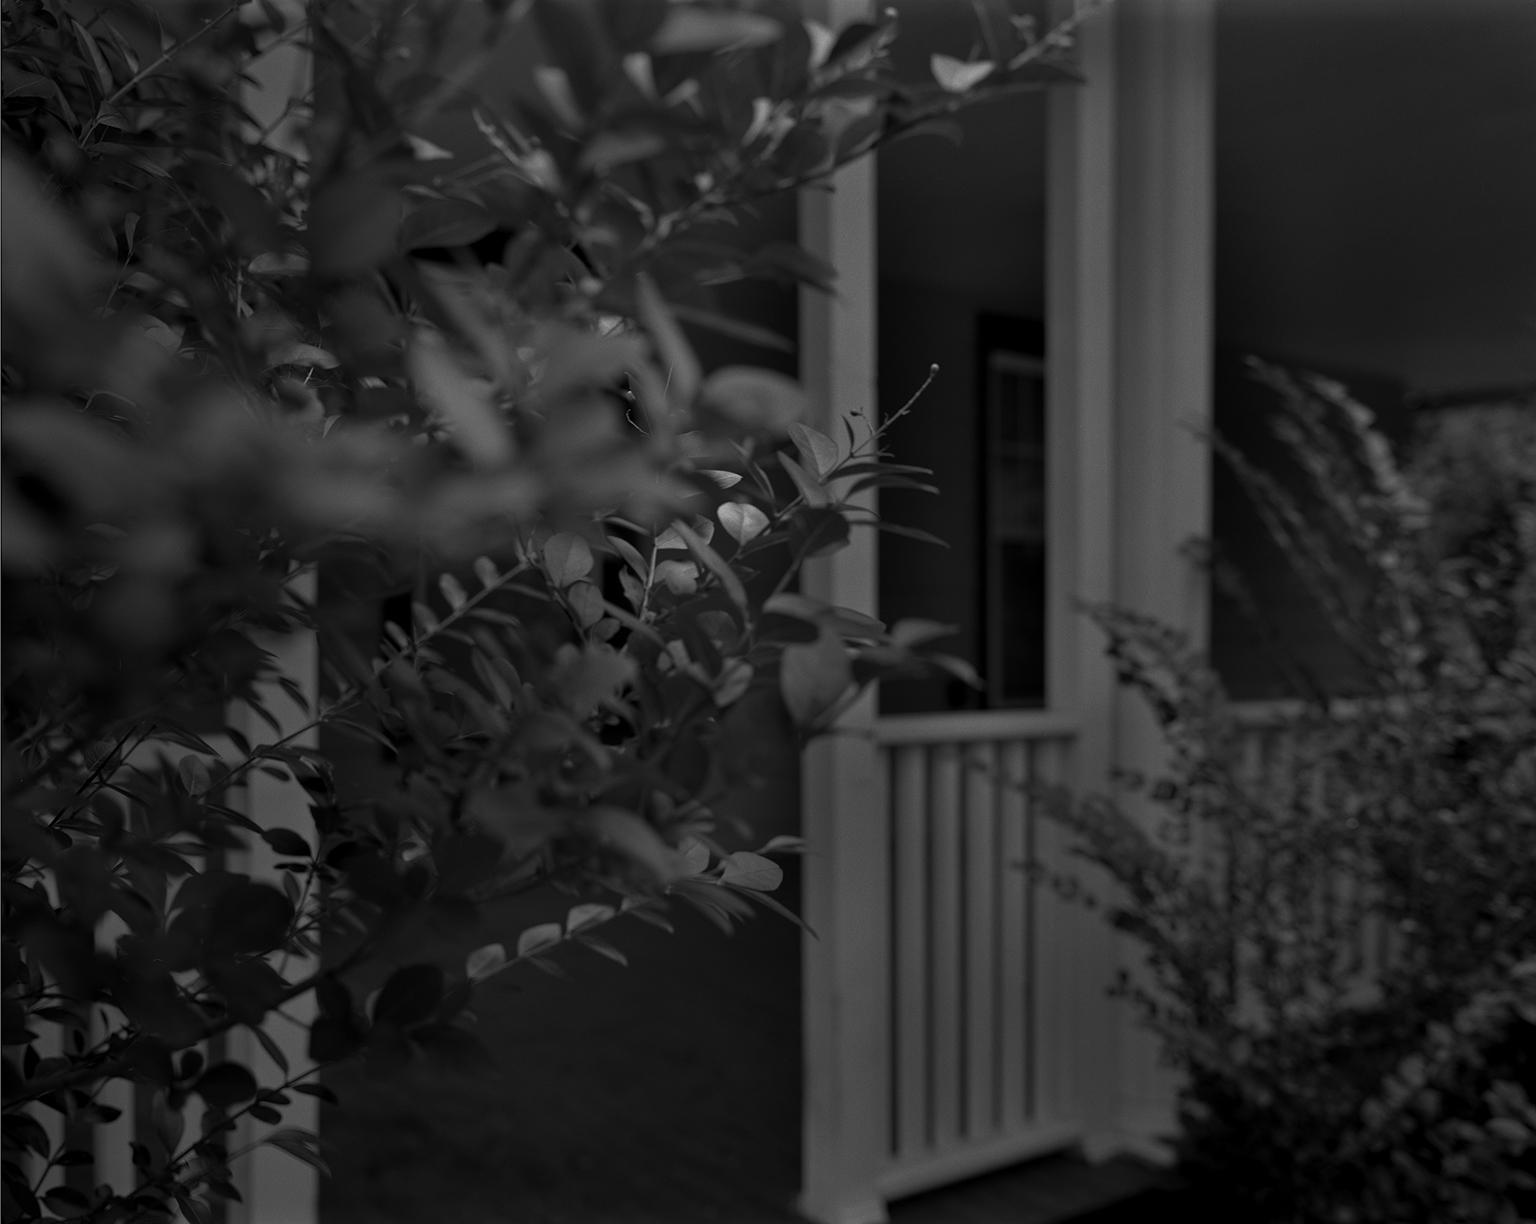 Dawoud Bey. “Untitled #4 (Leaves and Porch),” from the series “Night Coming Tenderly, Black,” 2017. Rennie Collection, Vancouver. © Dawoud Bey.